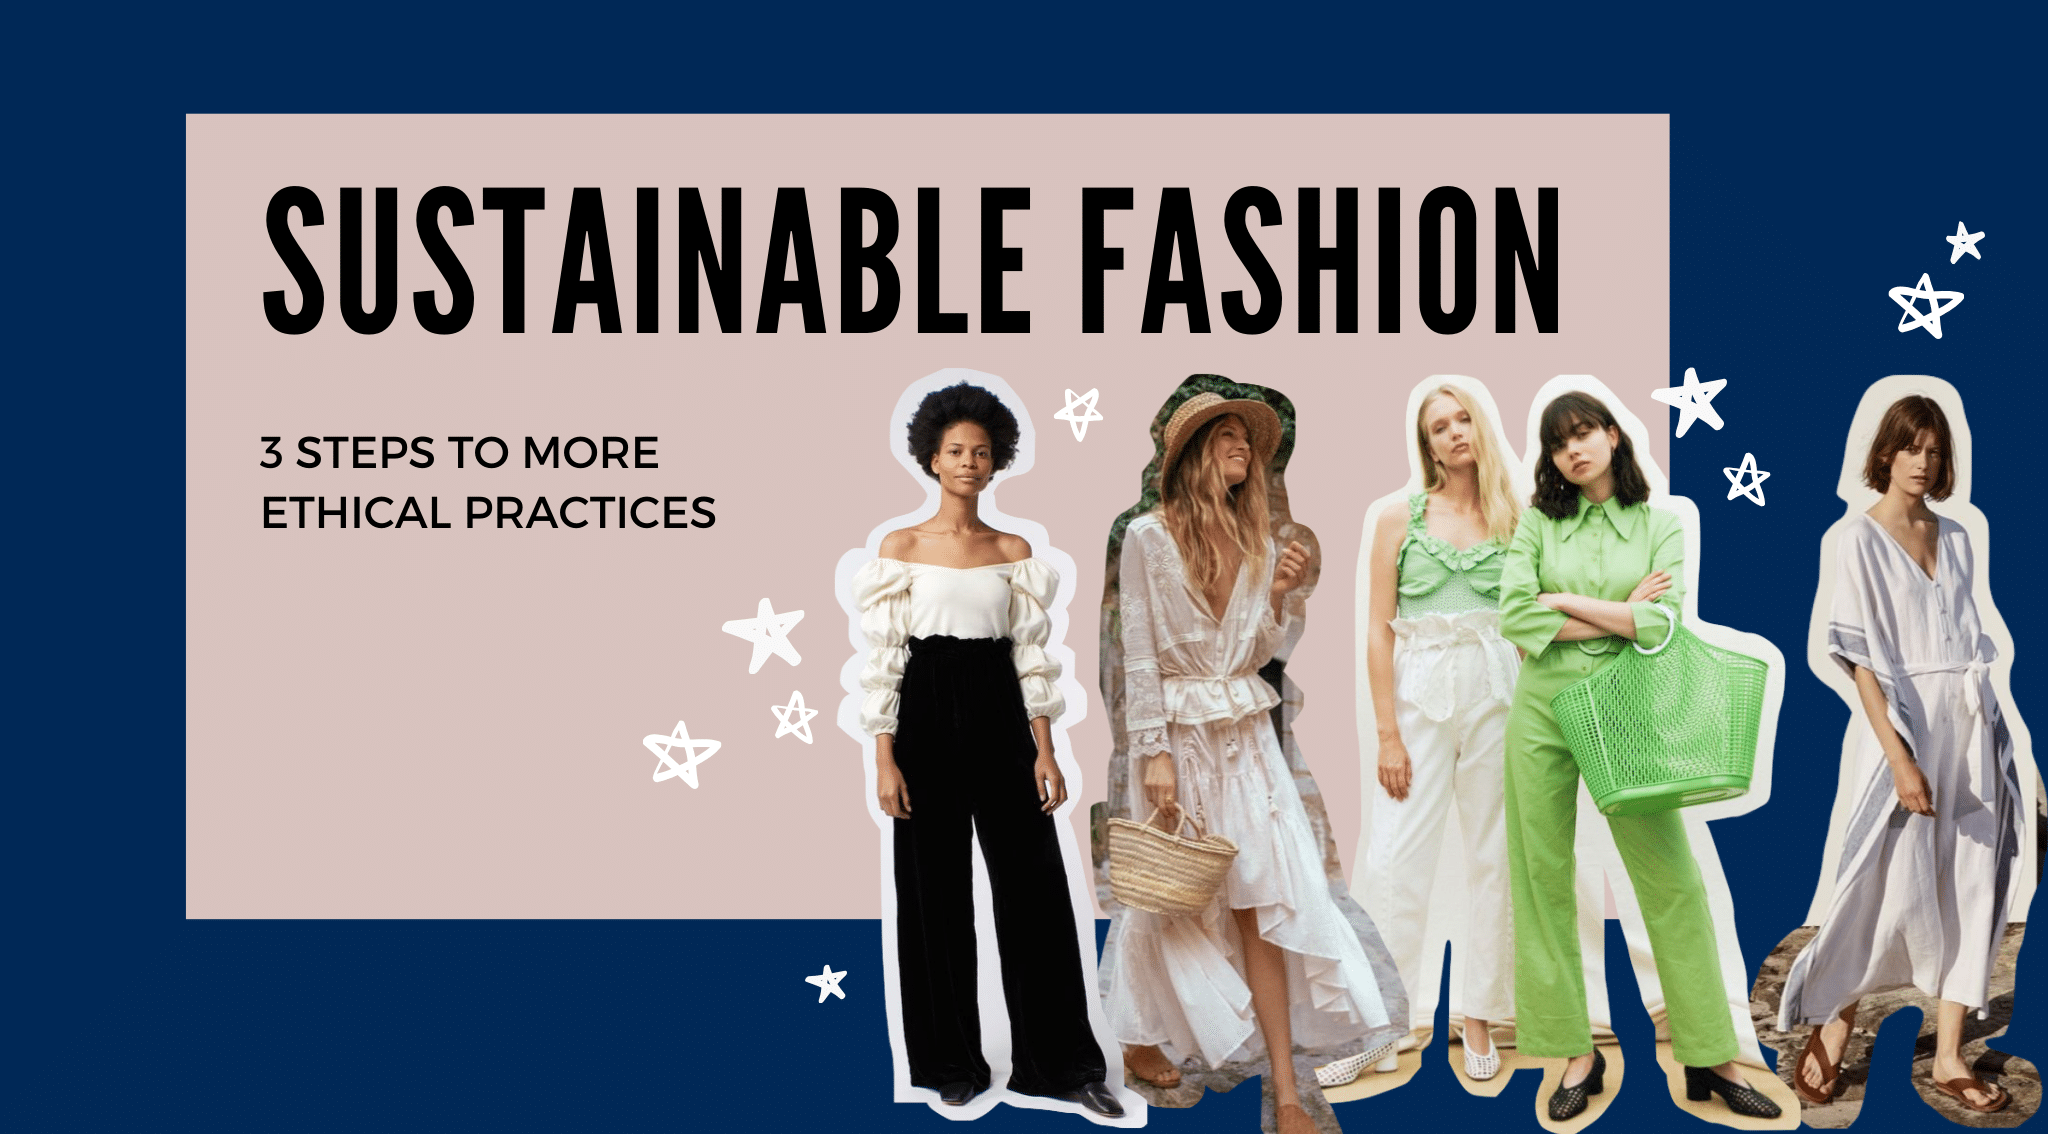 3 Steps to More Ethical & Sustainable Fashion Practices